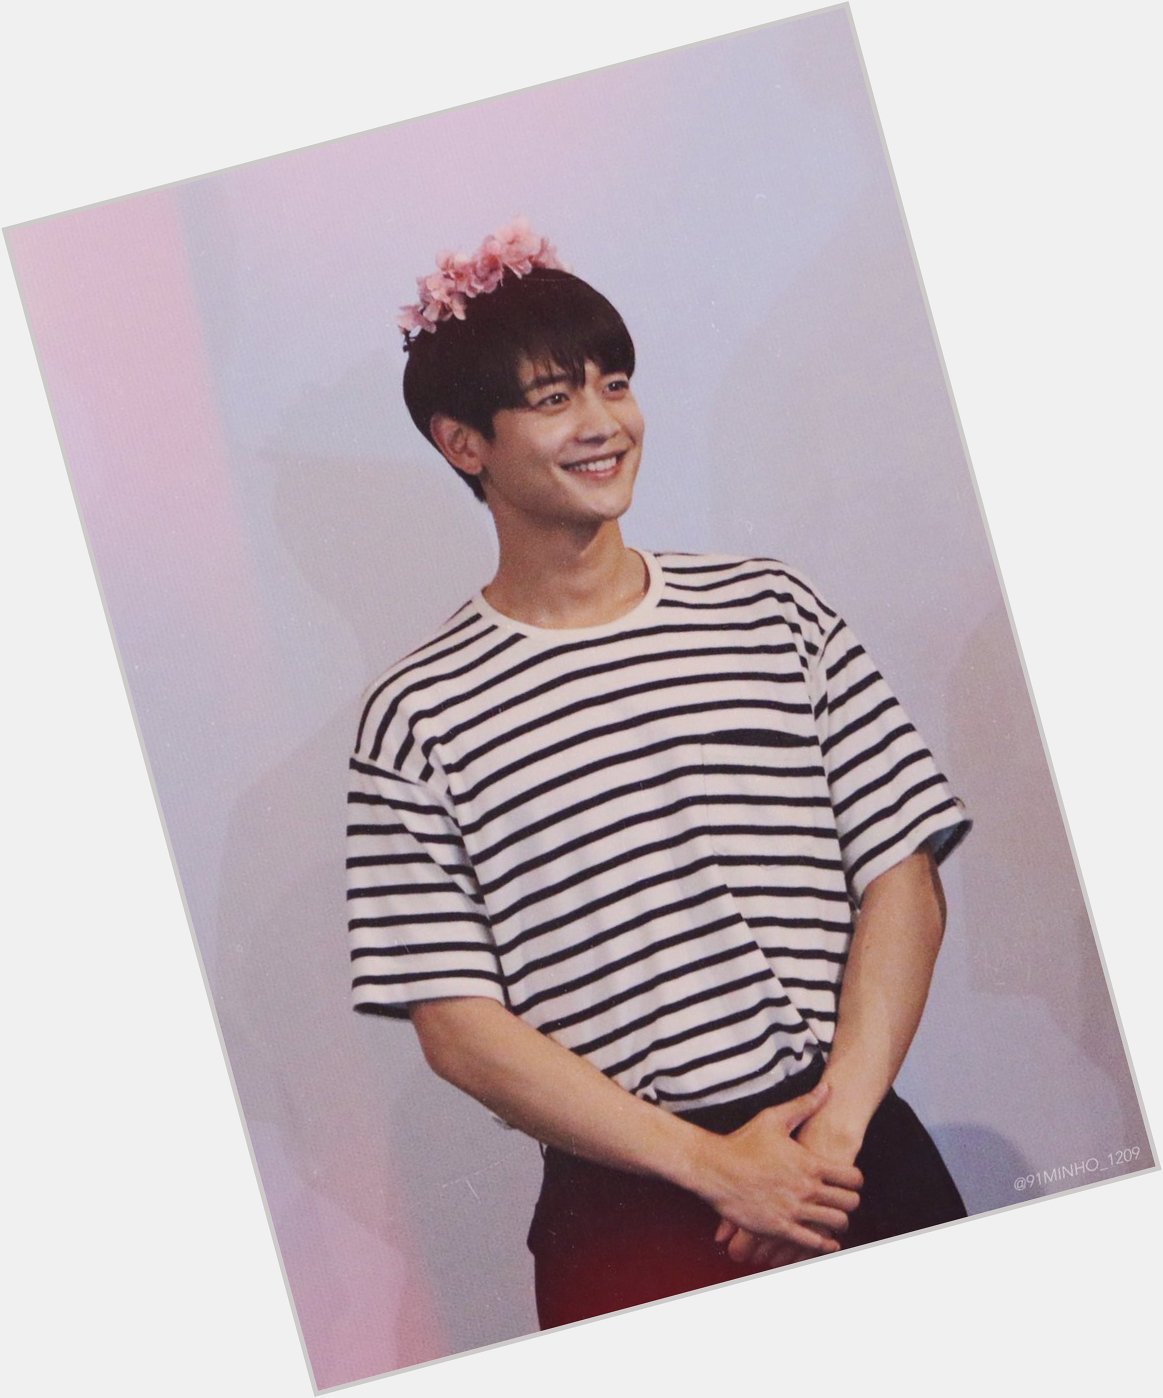 Happy birthday to the one and only, Choi MinHo! Wishing you all the happiness and luck . 